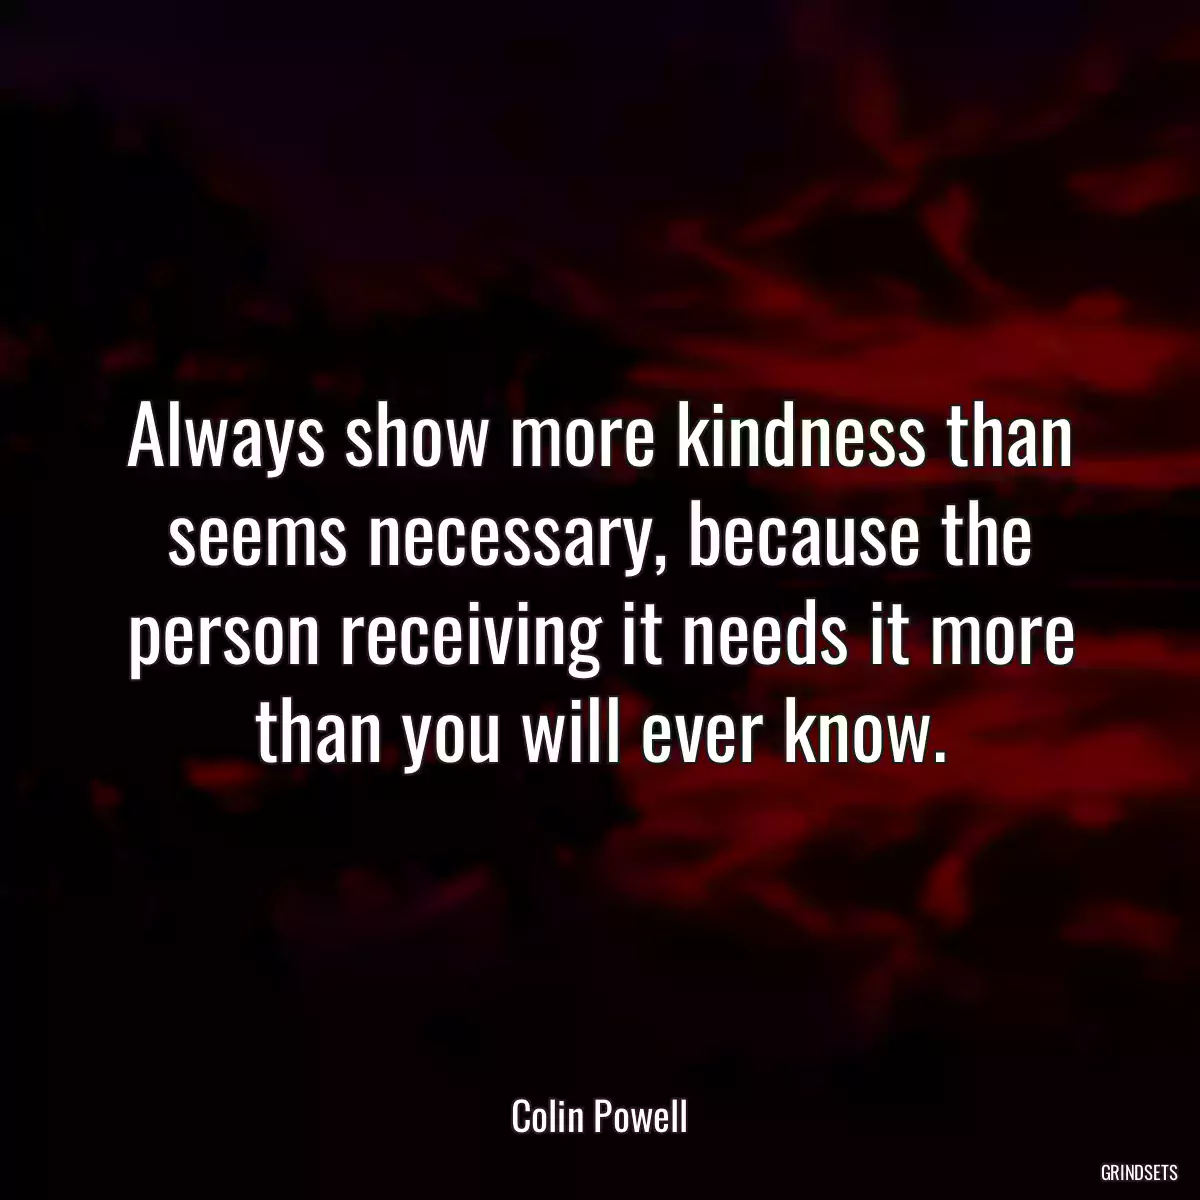 Always show more kindness than seems necessary, because the person receiving it needs it more than you will ever know.